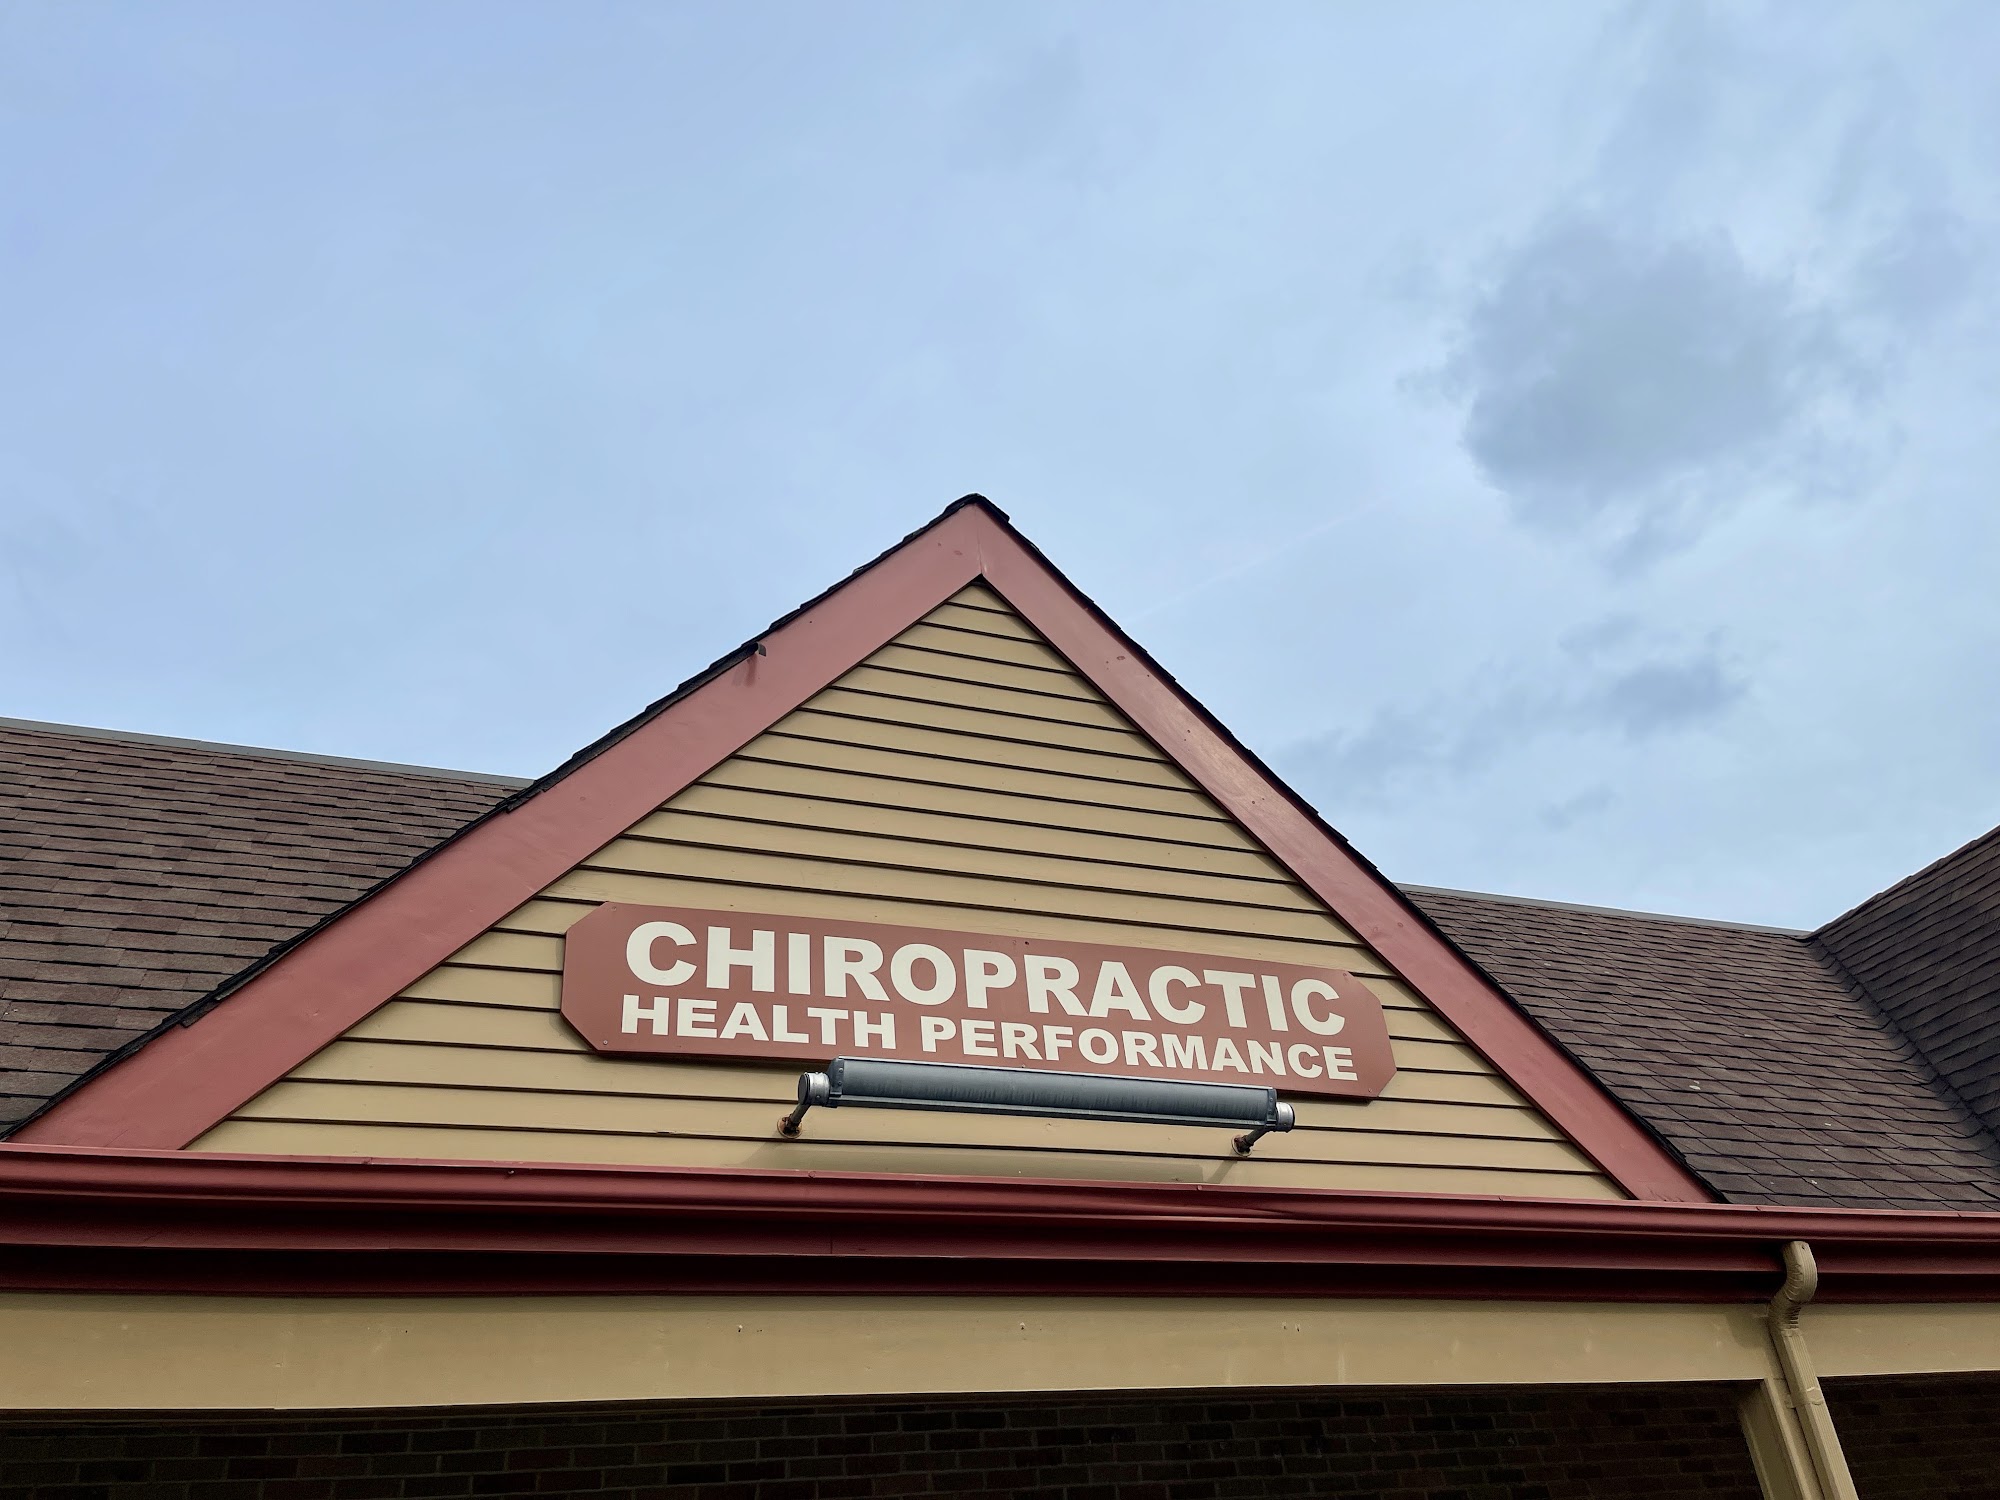 Chiropractic Health Performance: Dr. Kyle A. Innes, DC